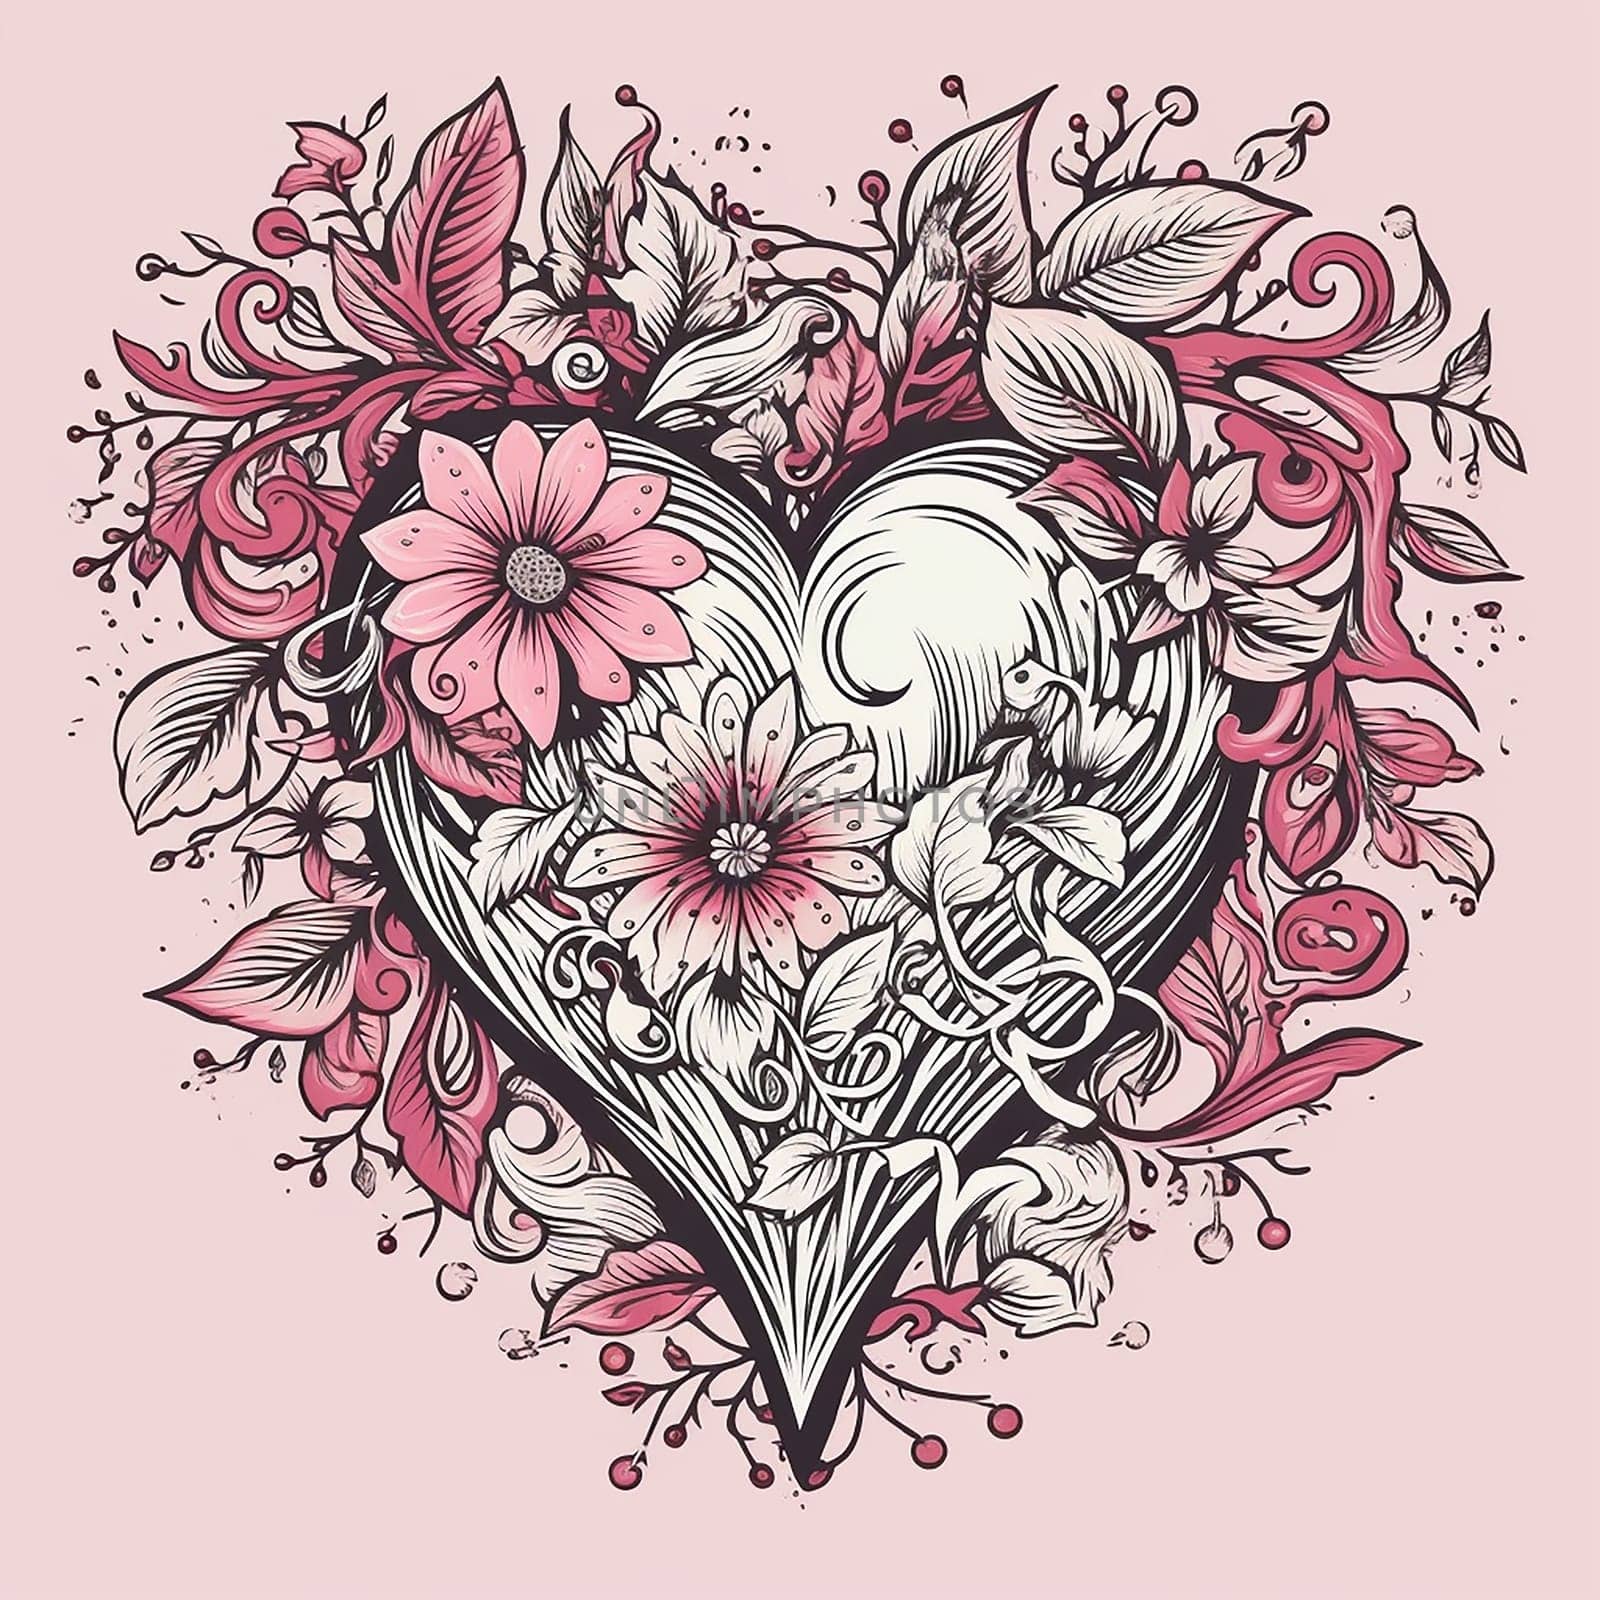 Stylized heart with intricate floral and wave details in a pink and white color scheme.